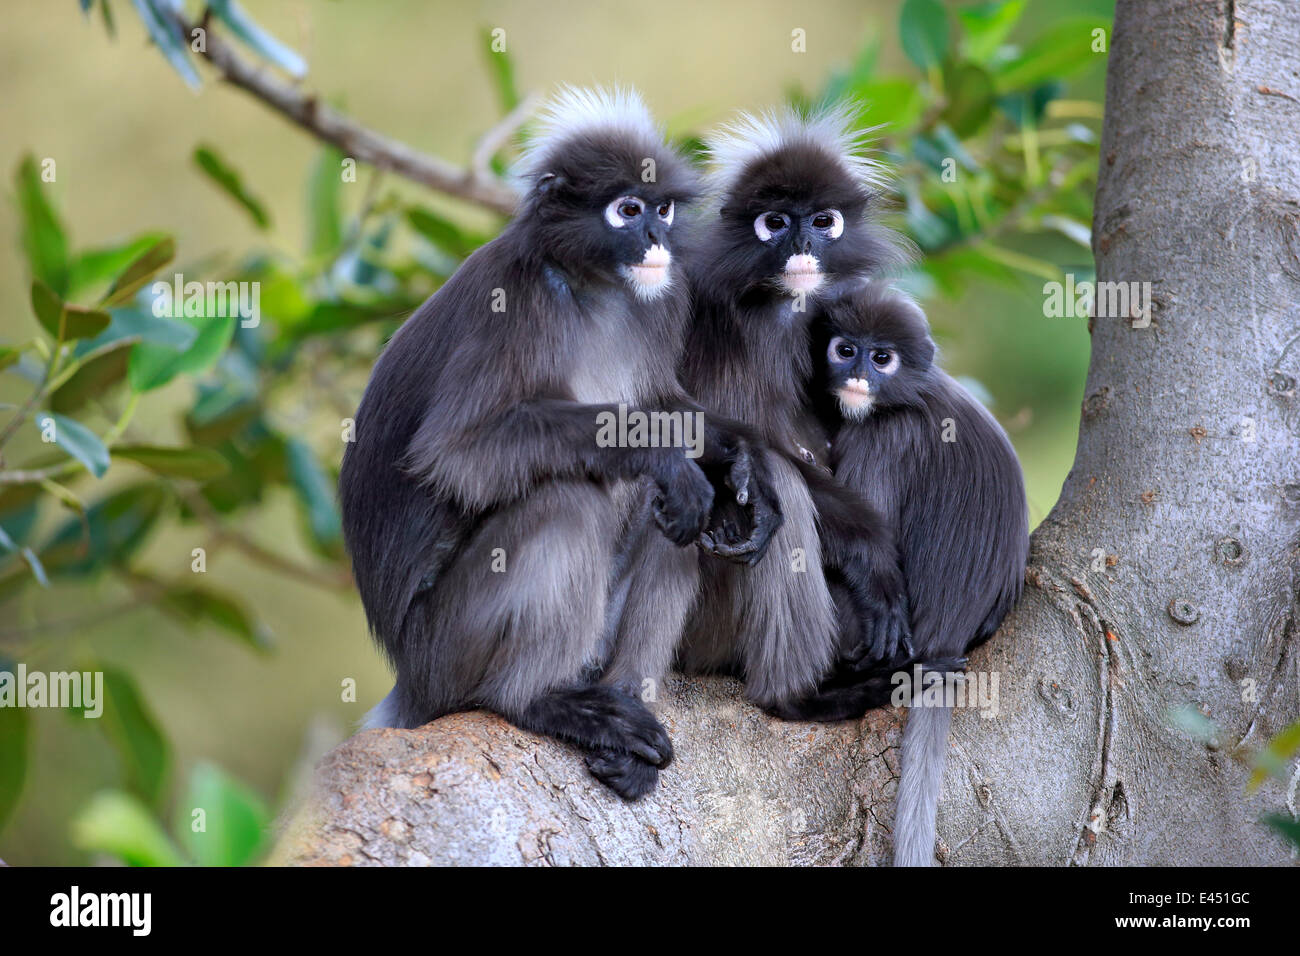 Dusky Leaf Monkey, Spectacled Langur, or Spectacled Leaf Monkey  (Trachypithecus obscurus), Stock Photo, Picture And Rights Managed Image.  Pic. IBR-1832866